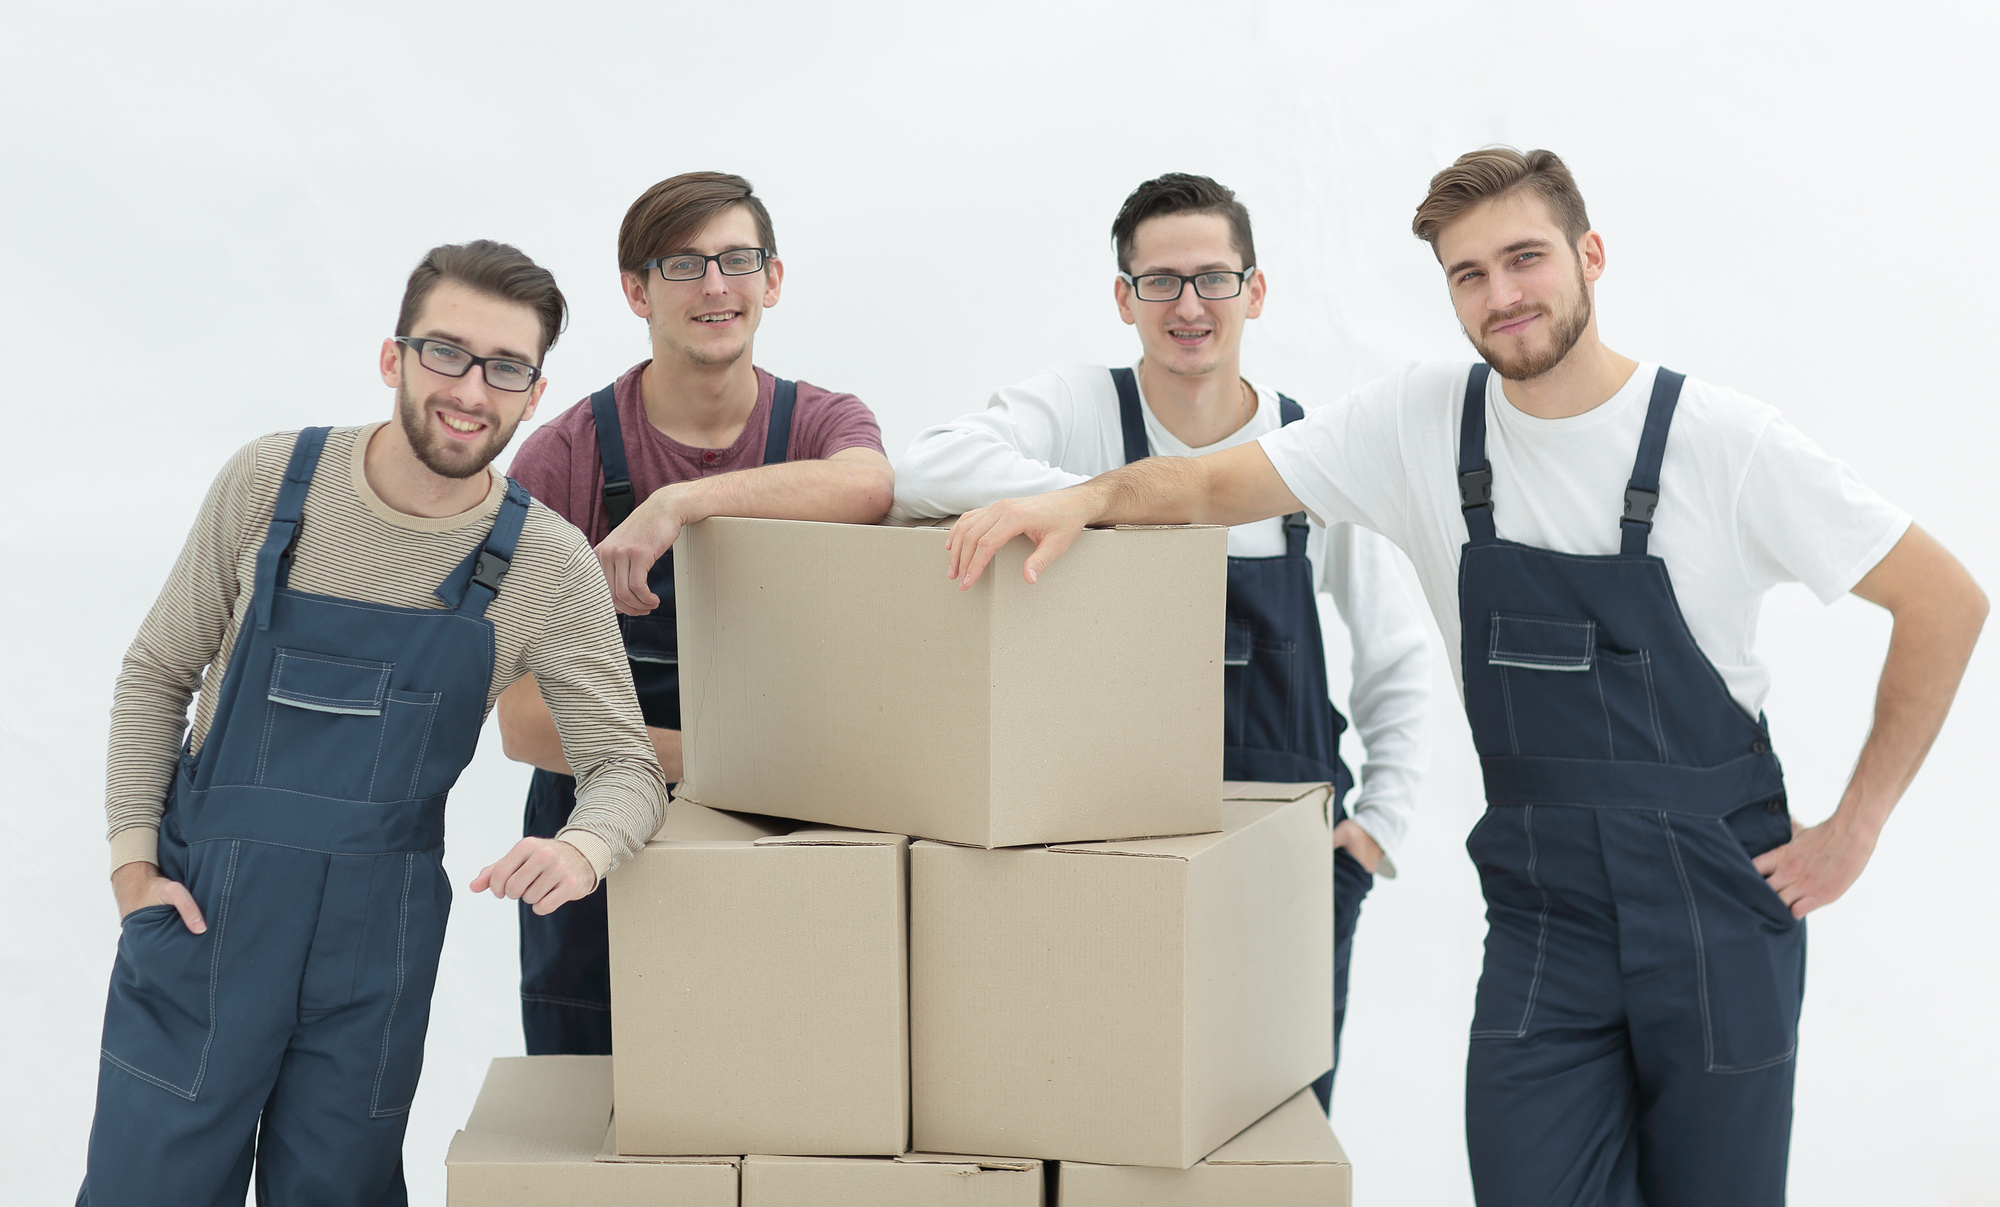 Why Use a Moving Service? Top Reasons to Consider Hiring the Best Movers in Lancaster Pa